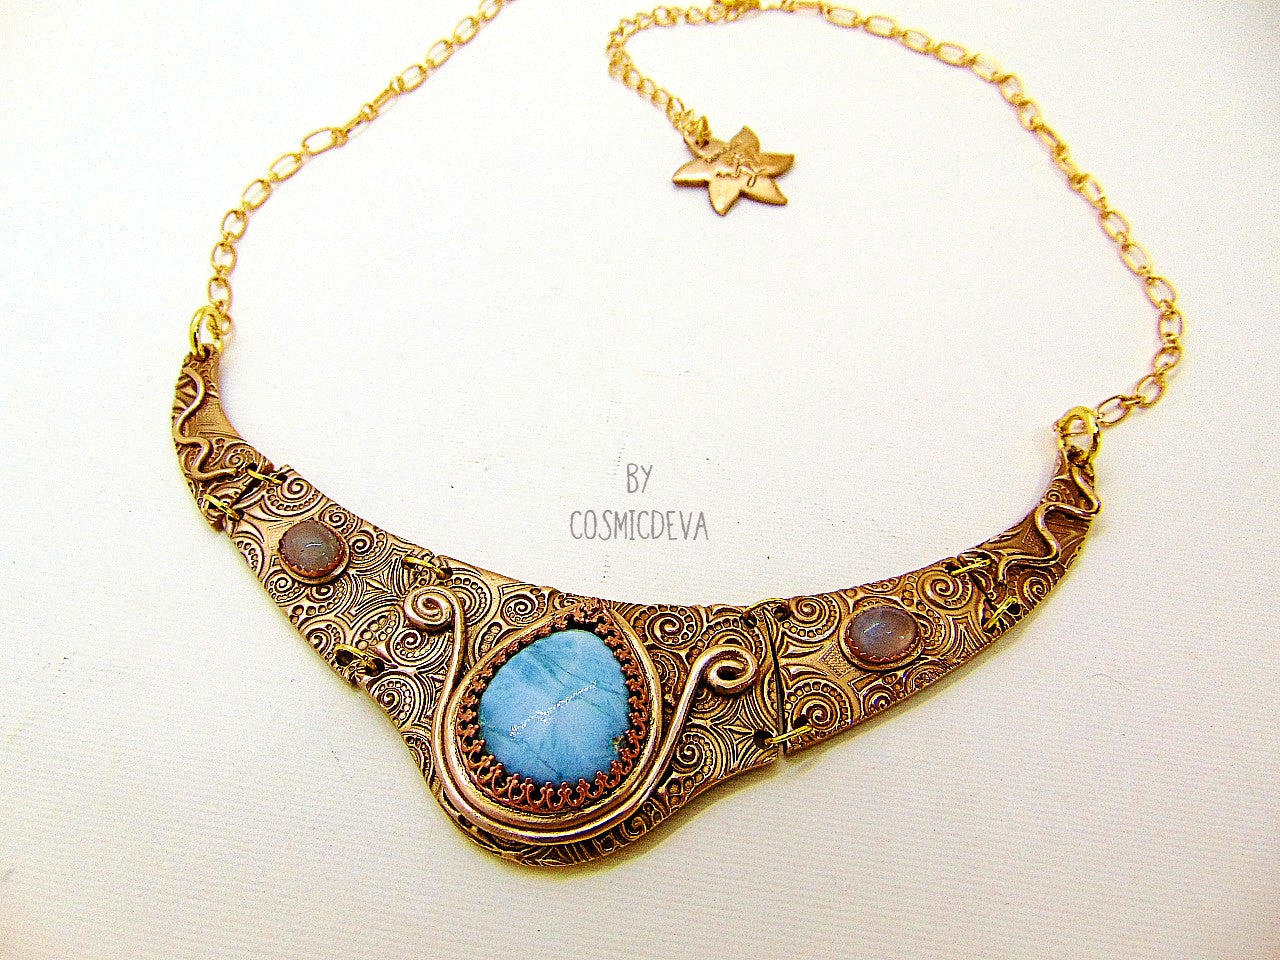 This lovely collar is completely hand formed with solid gold bronze. The center of this Mycenean inspired choker necklace is adorned with a beautiful aqua blue larimar gemstone and two aquamarine gemstones. A unique adornment that will adore to wear in all occasions.